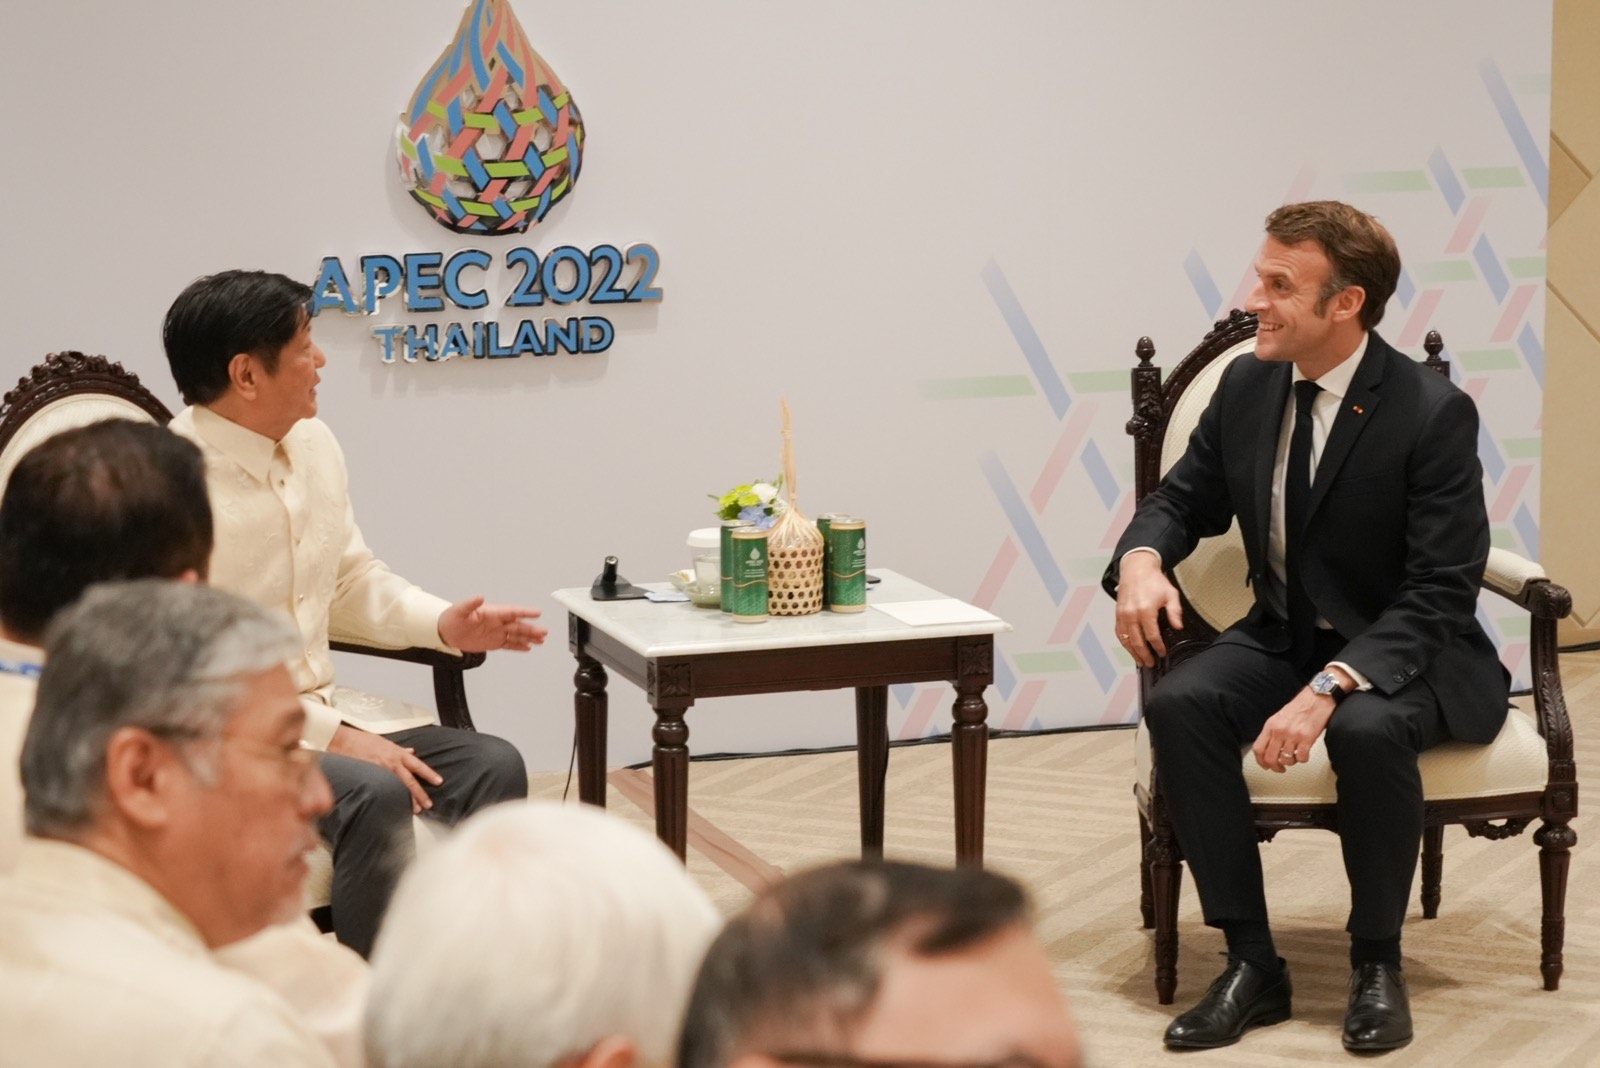 BANGKOK, Thailand — President Ferdinand "Bongbong" Marcos Jr. has held separate bilateral meetings with his counterparts in Saudi Arabia and France. On the sidelines of the Asia Pacific Economic Cooperation (Apec) Summit here on Friday, Marcos discussed issues with Saudi Arabia's Crown Prince and Prime Minister Mohammed bin Salman and French President Emmanuel Macron.